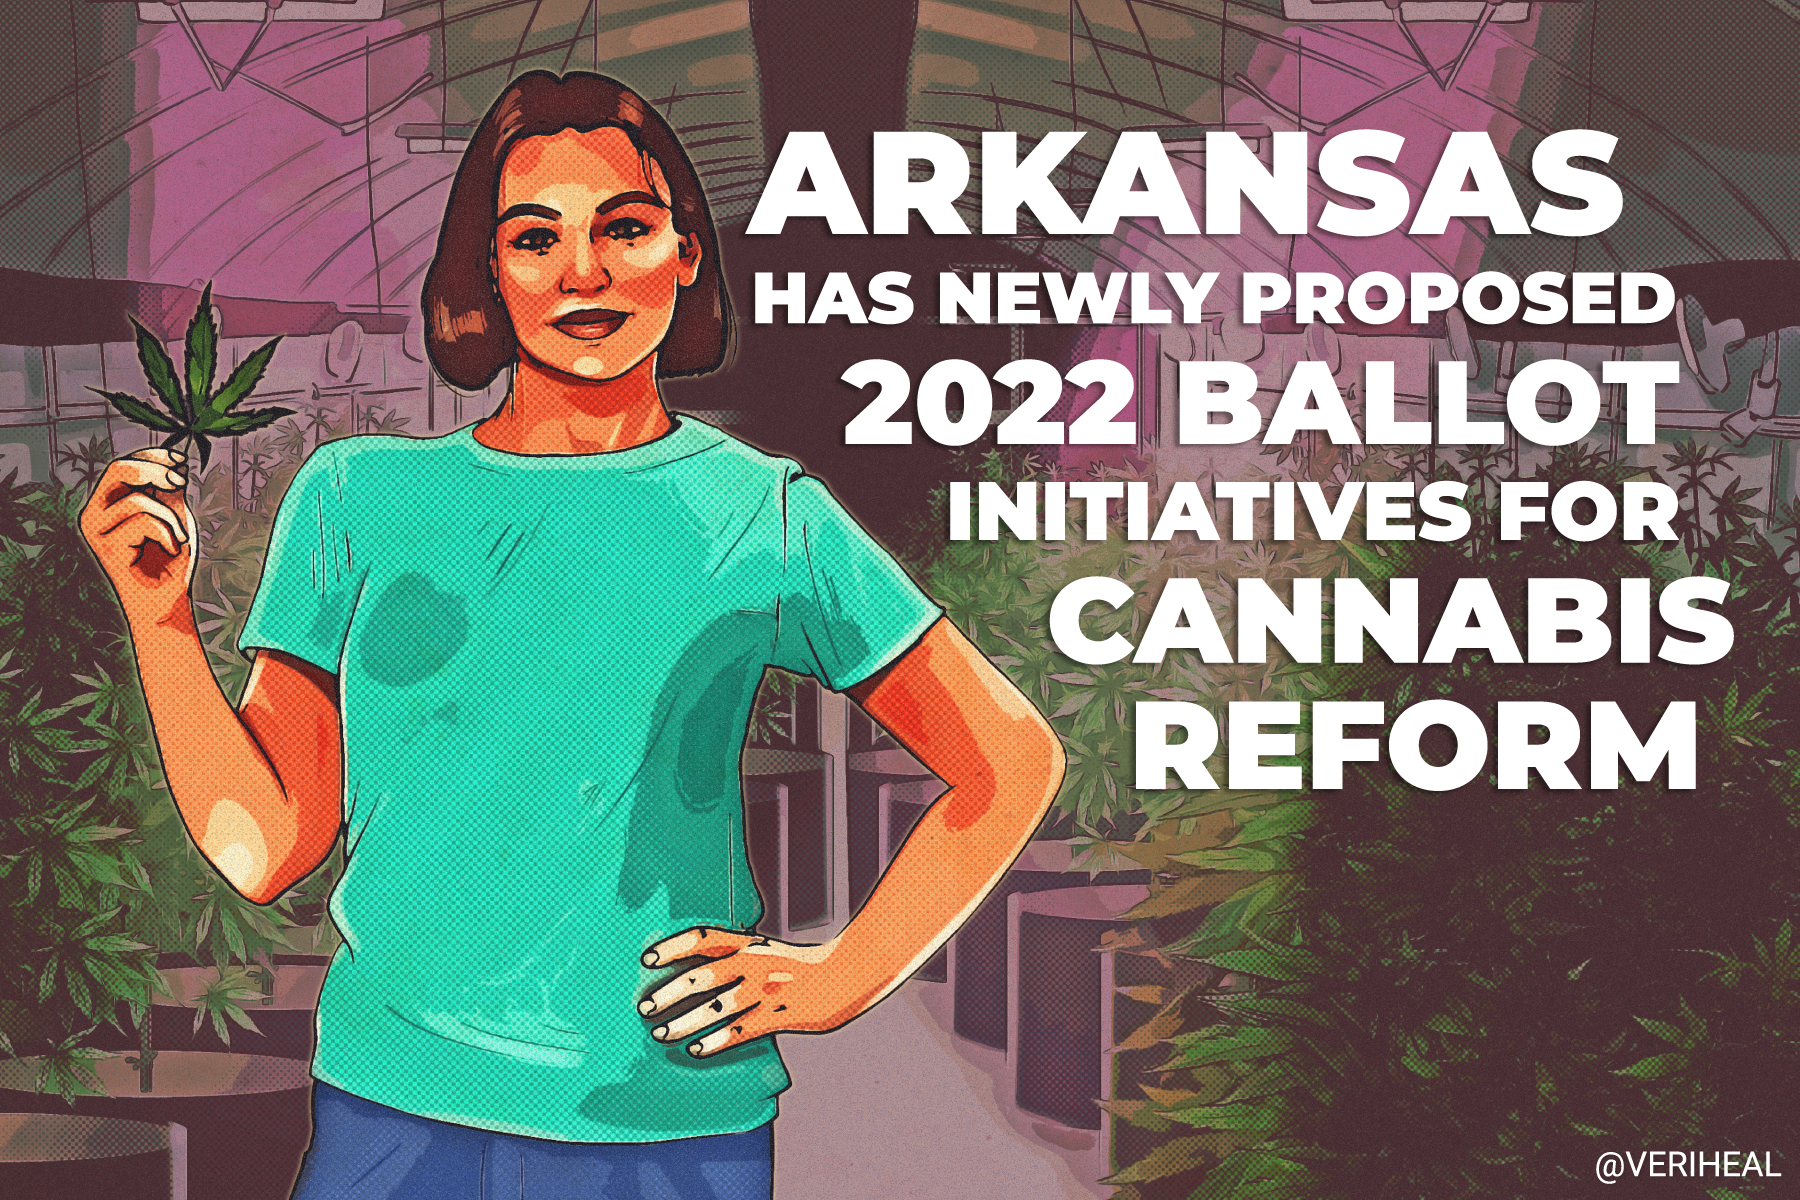 Arkansas Has Newly Proposed 2022 Ballot Initiatives for Cannabis Reform